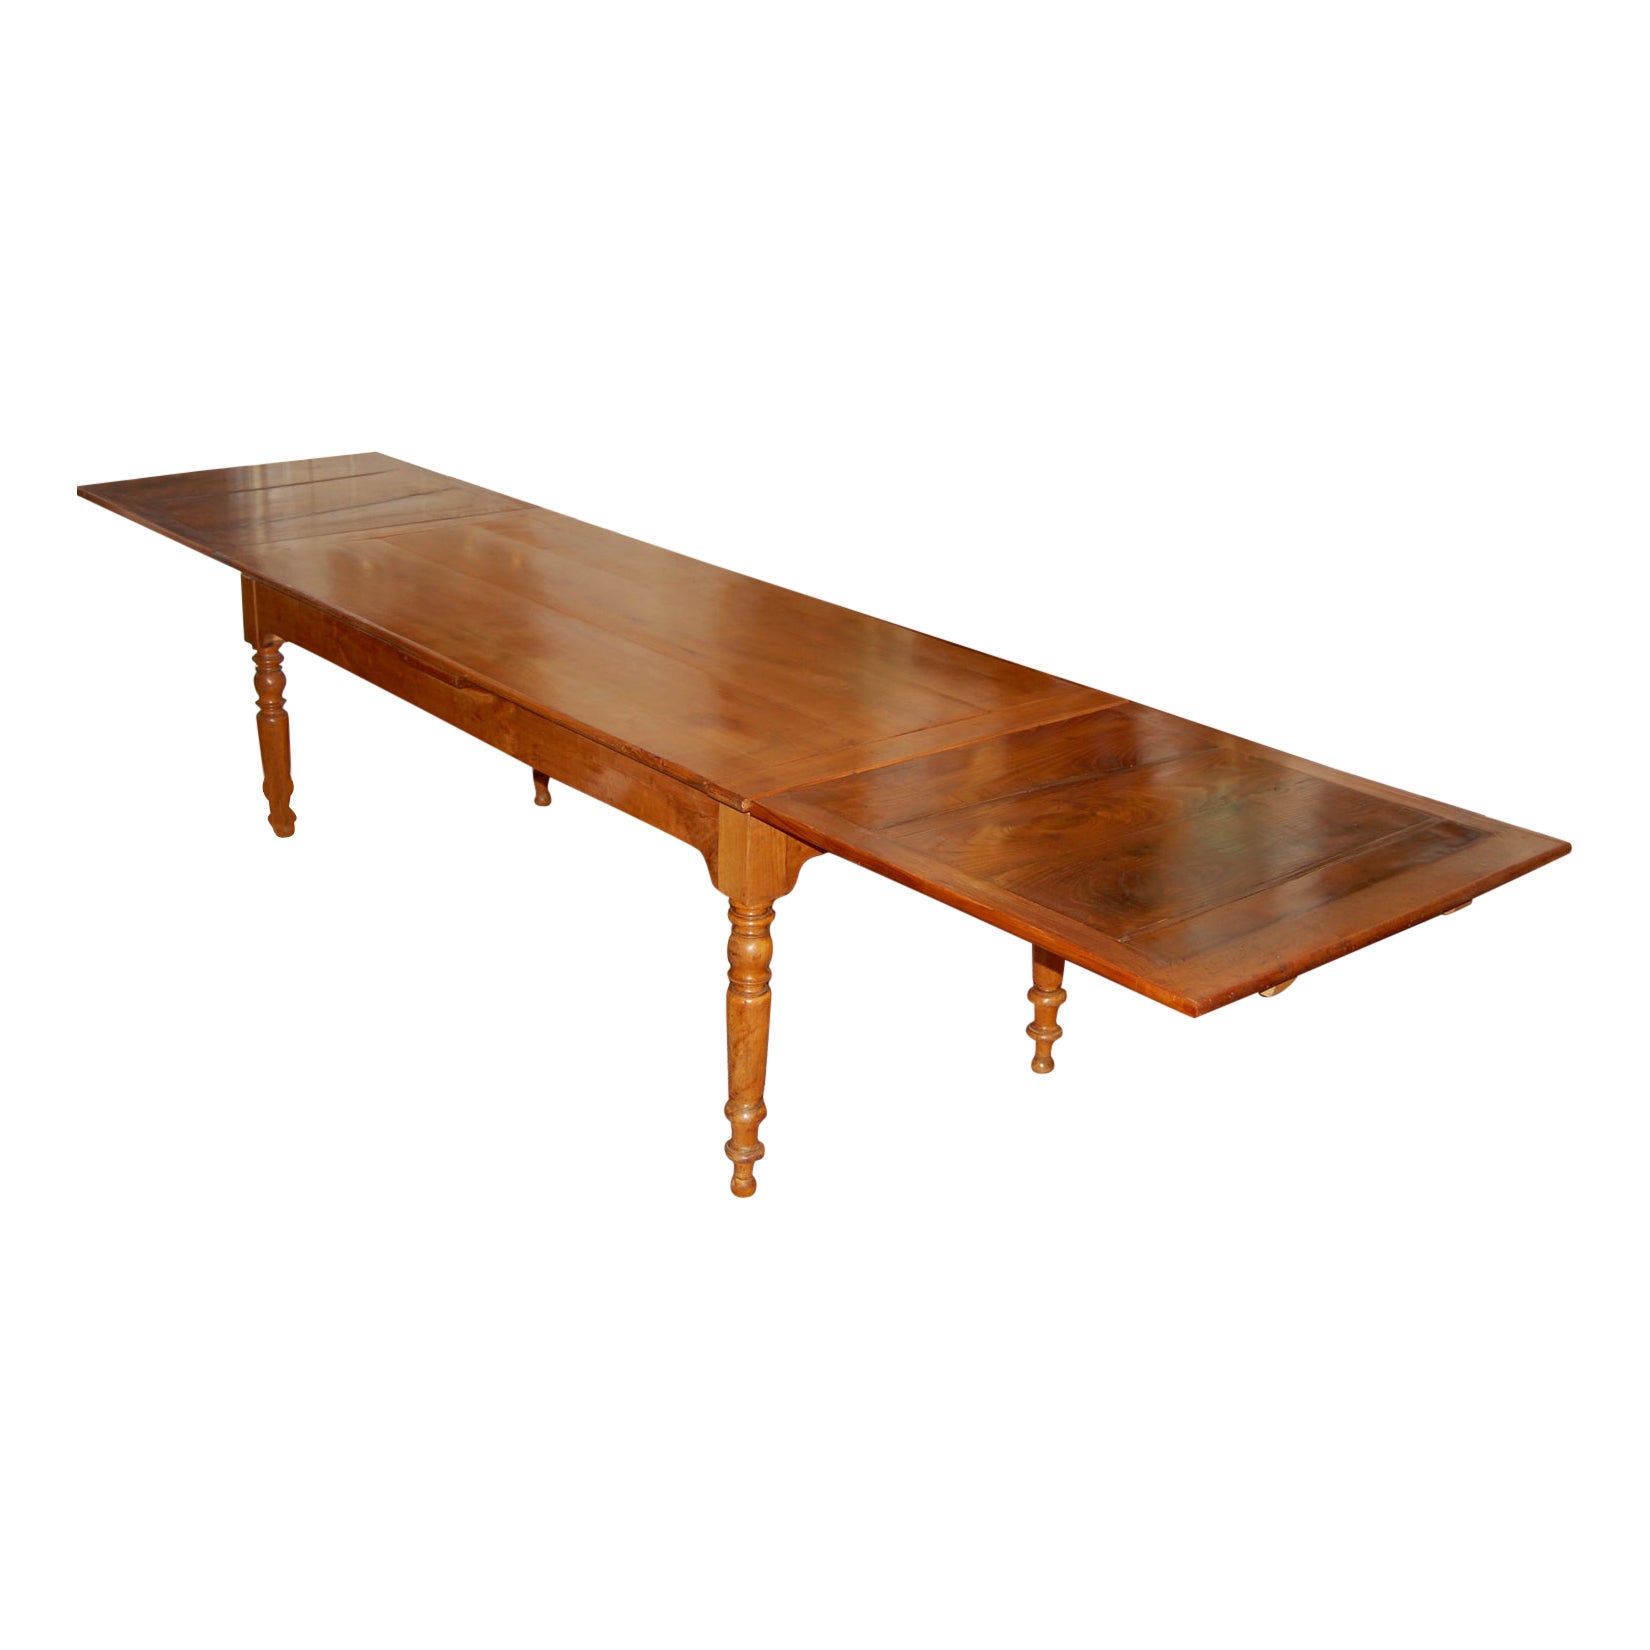 French Mid-19th Century Farmhouse Cherry Extending Table For Sale